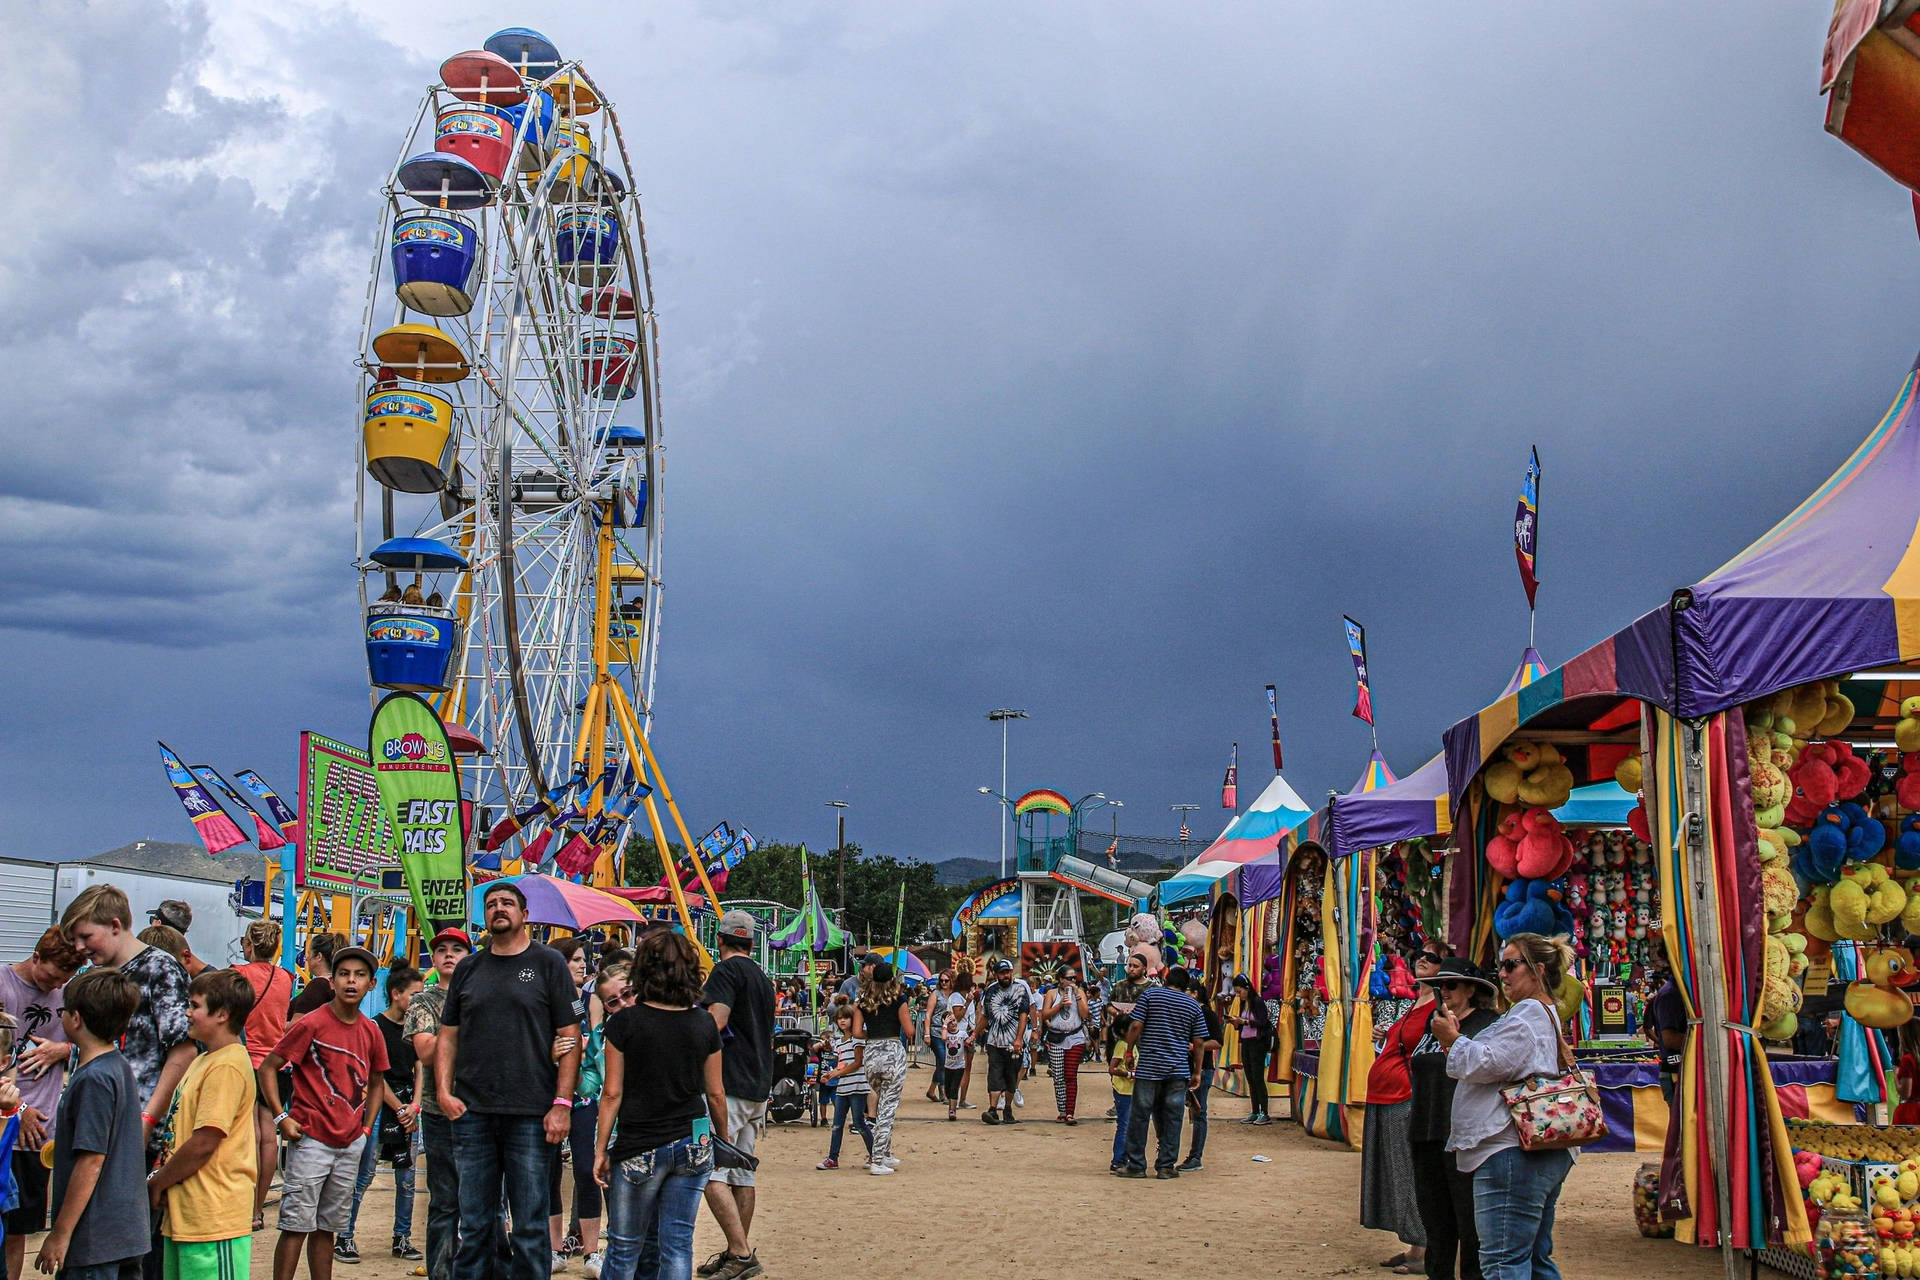 Cloudy Day At The Fair Wallpaper